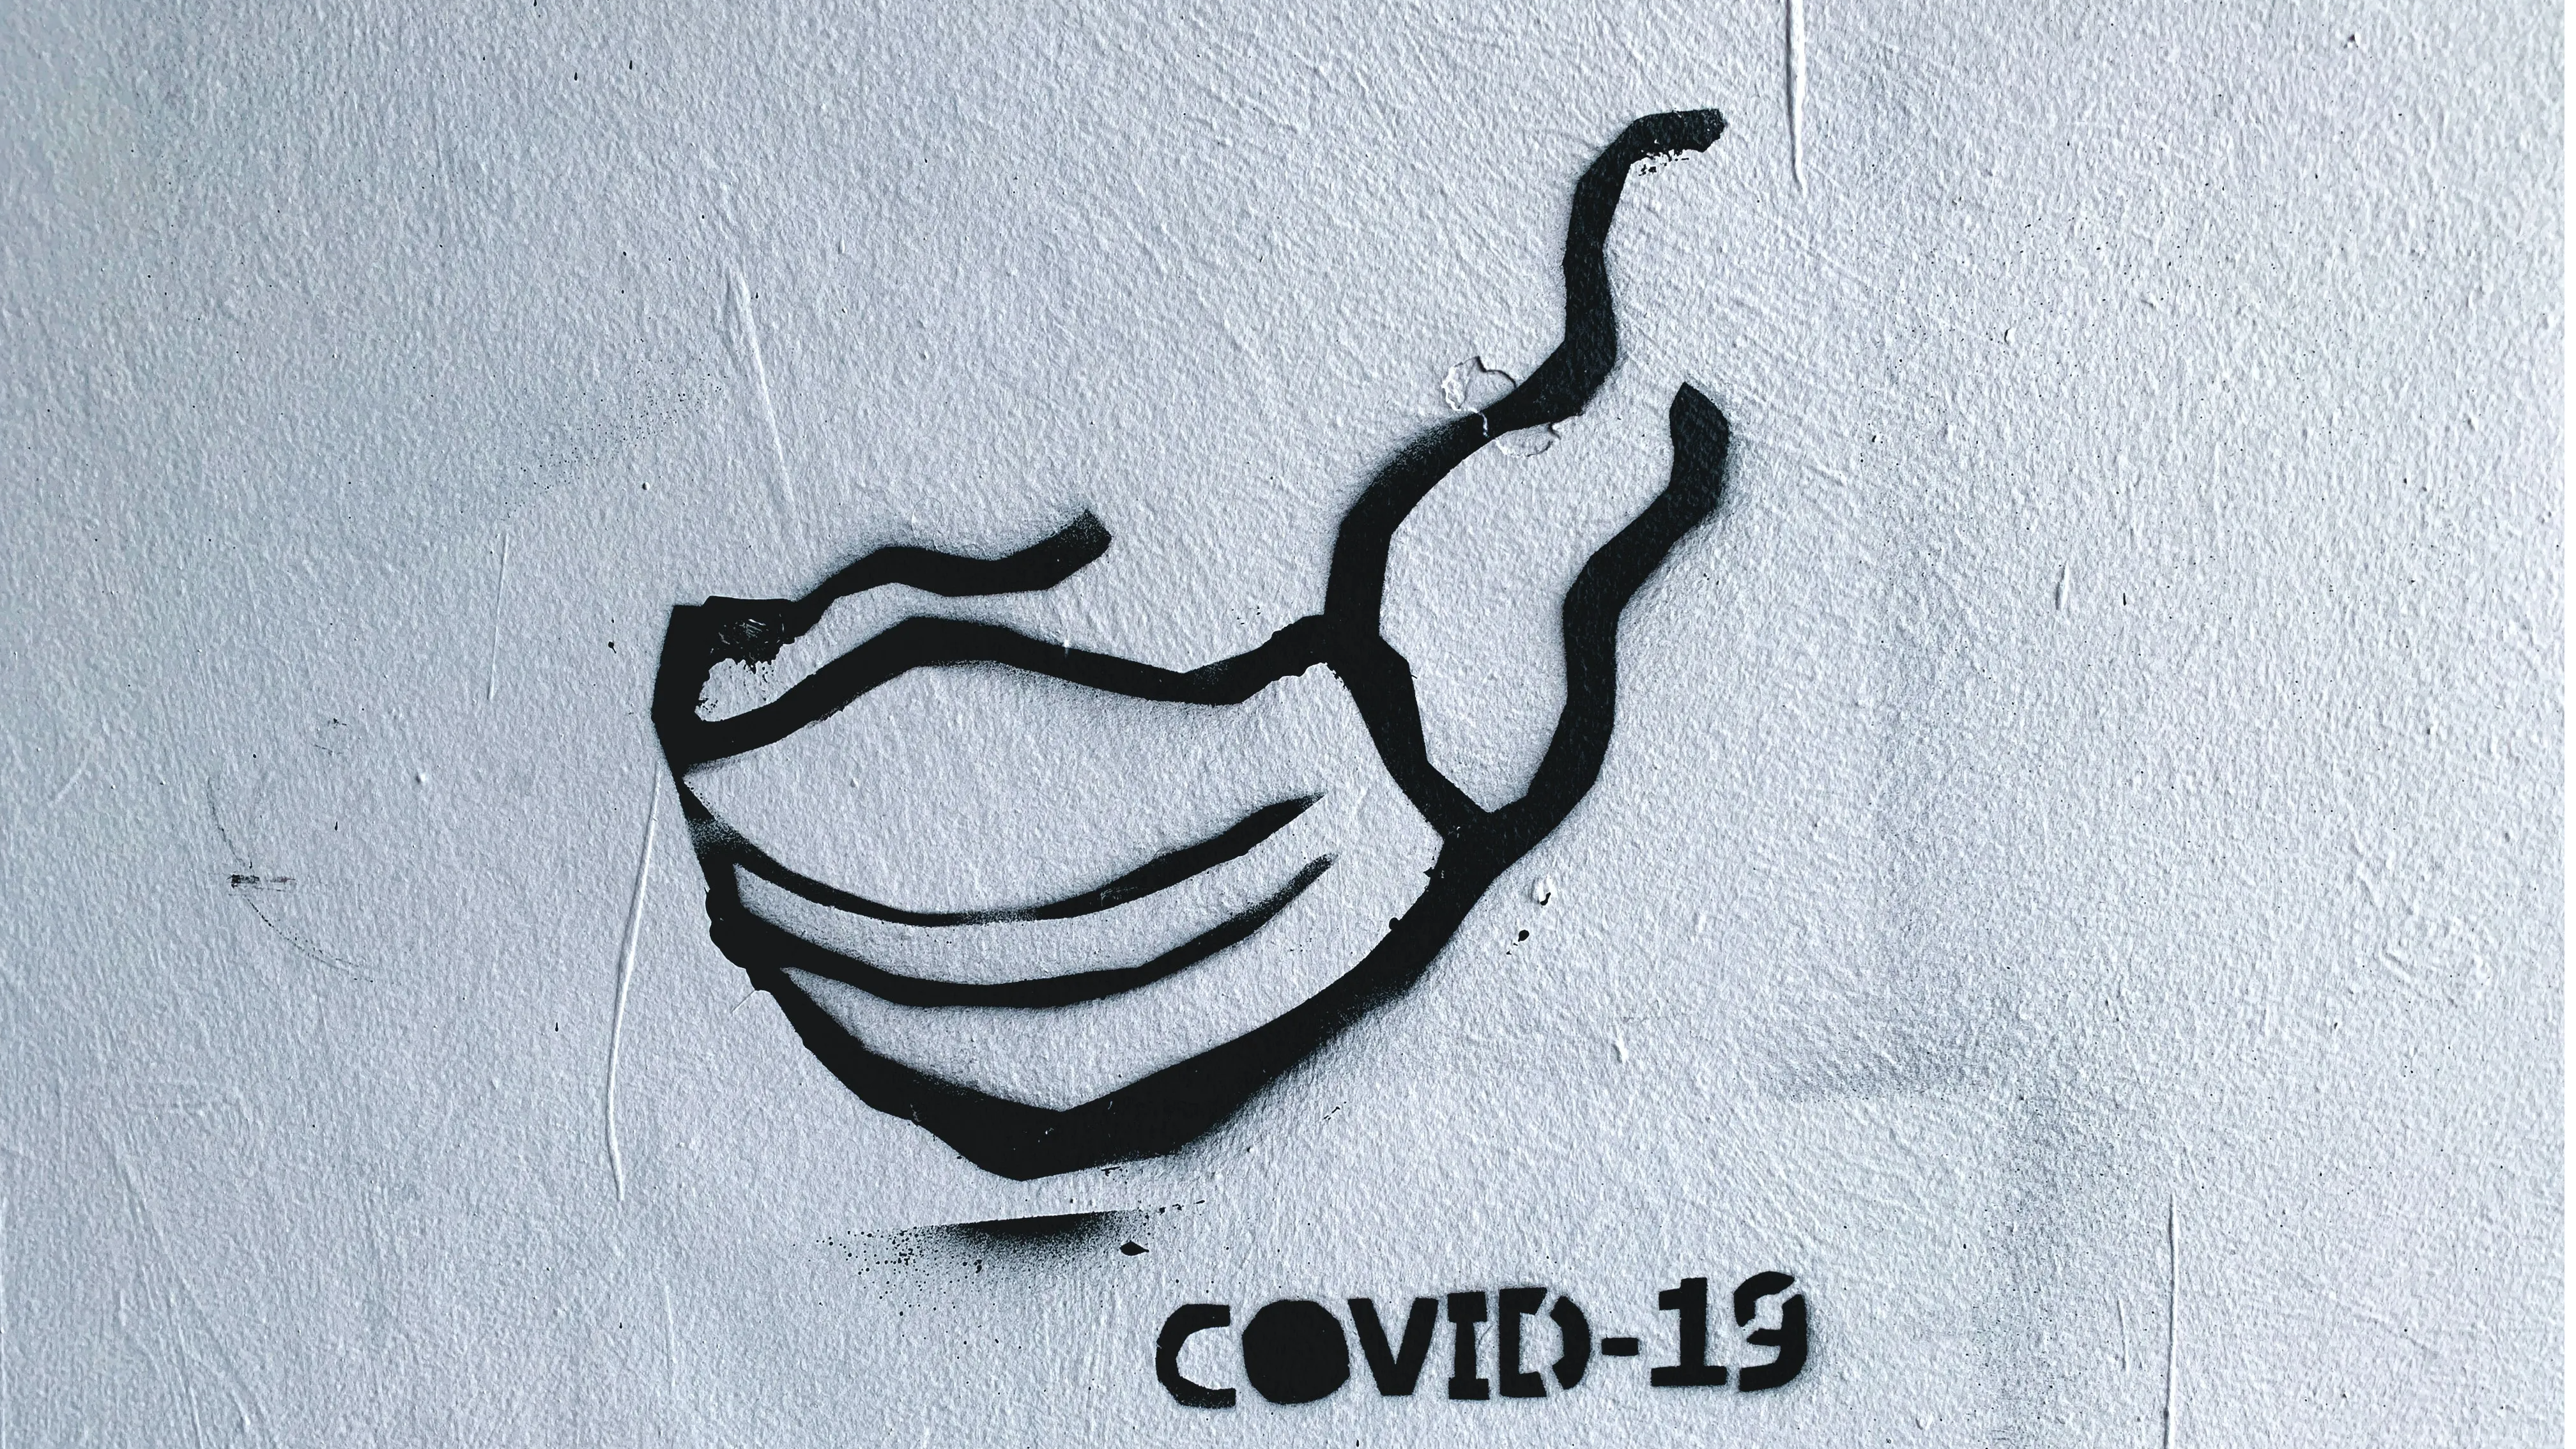 New ‘B117’ COVID-19 variant infecting younger people, threatens 4th wave in US